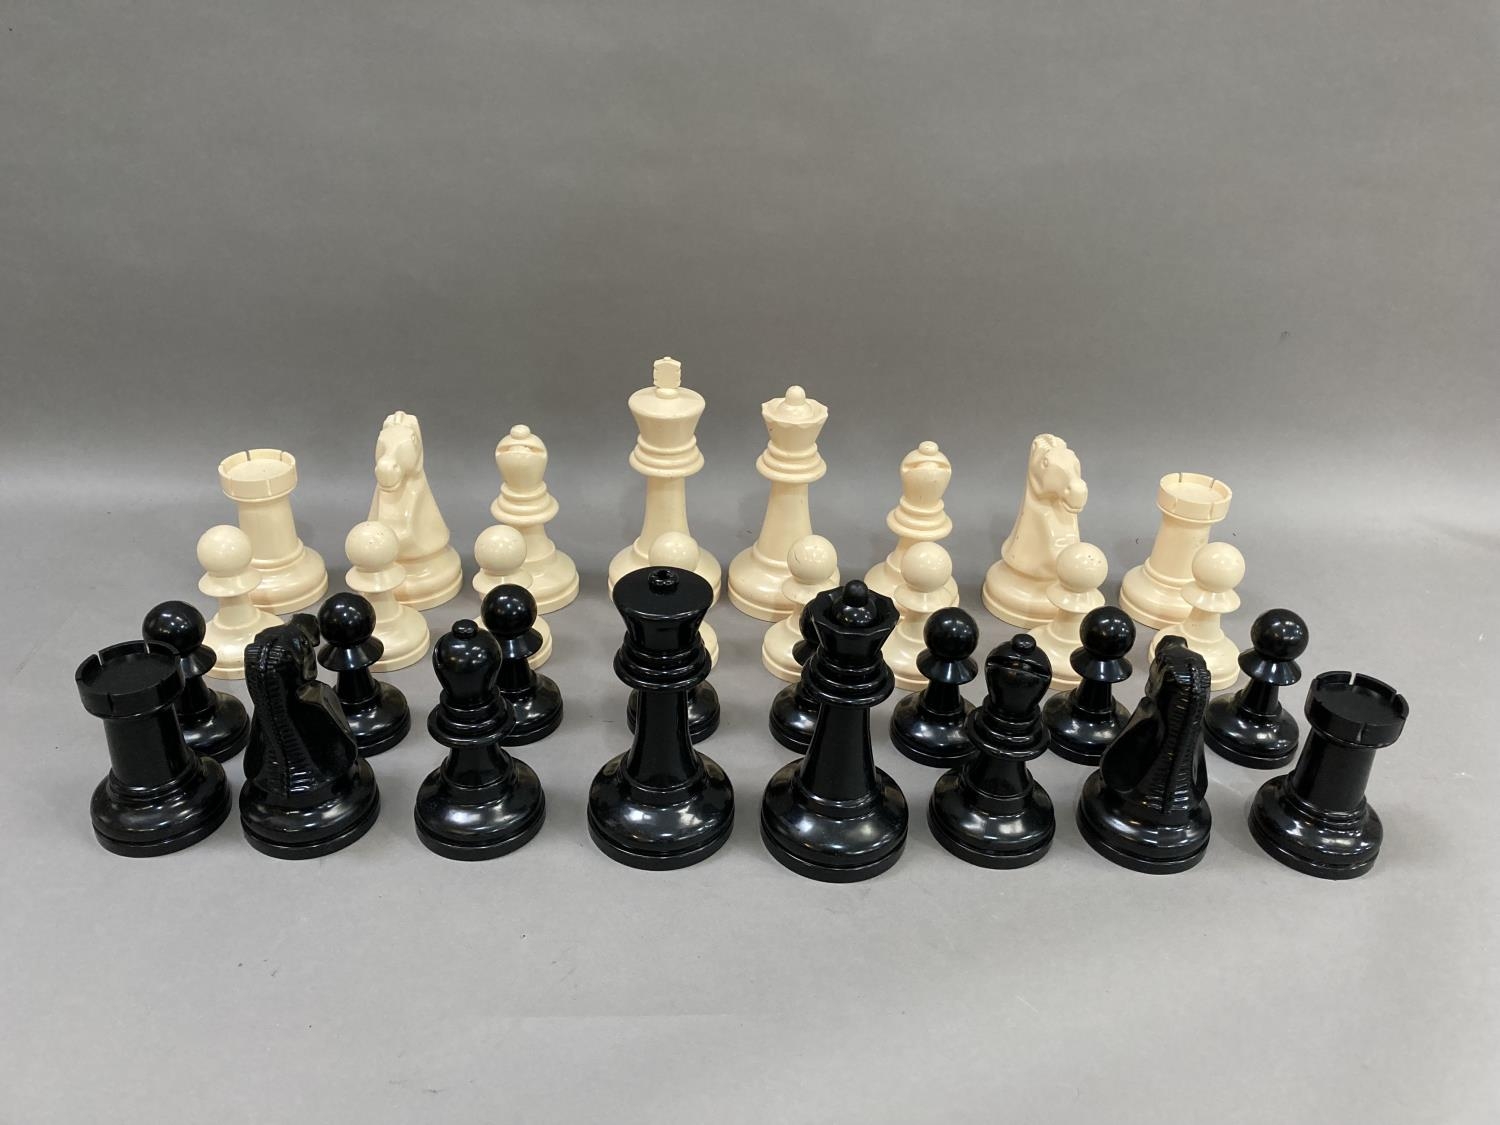 A outdoors chess set in cream and black plastic, the king measuring 21cm high